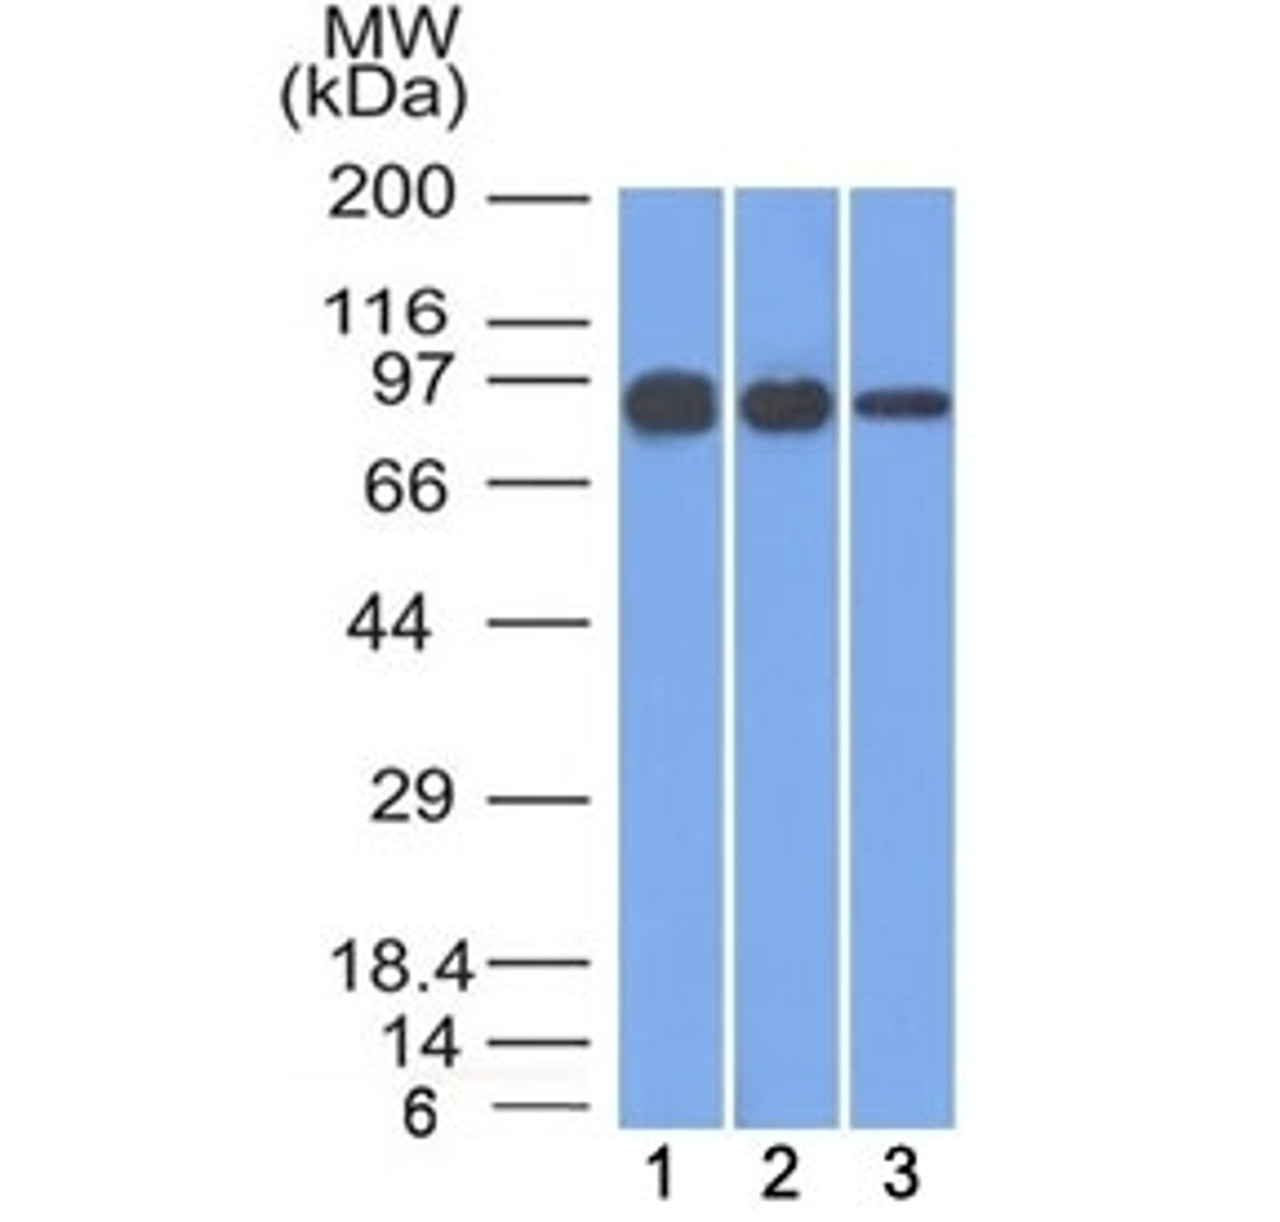 Western blot testing of human 1) A431, 2) A549 and 3) MCF7 cell lysate with Beta Catenin antibody (clone 12F7) . Expected molecular weight ~92 kDa.